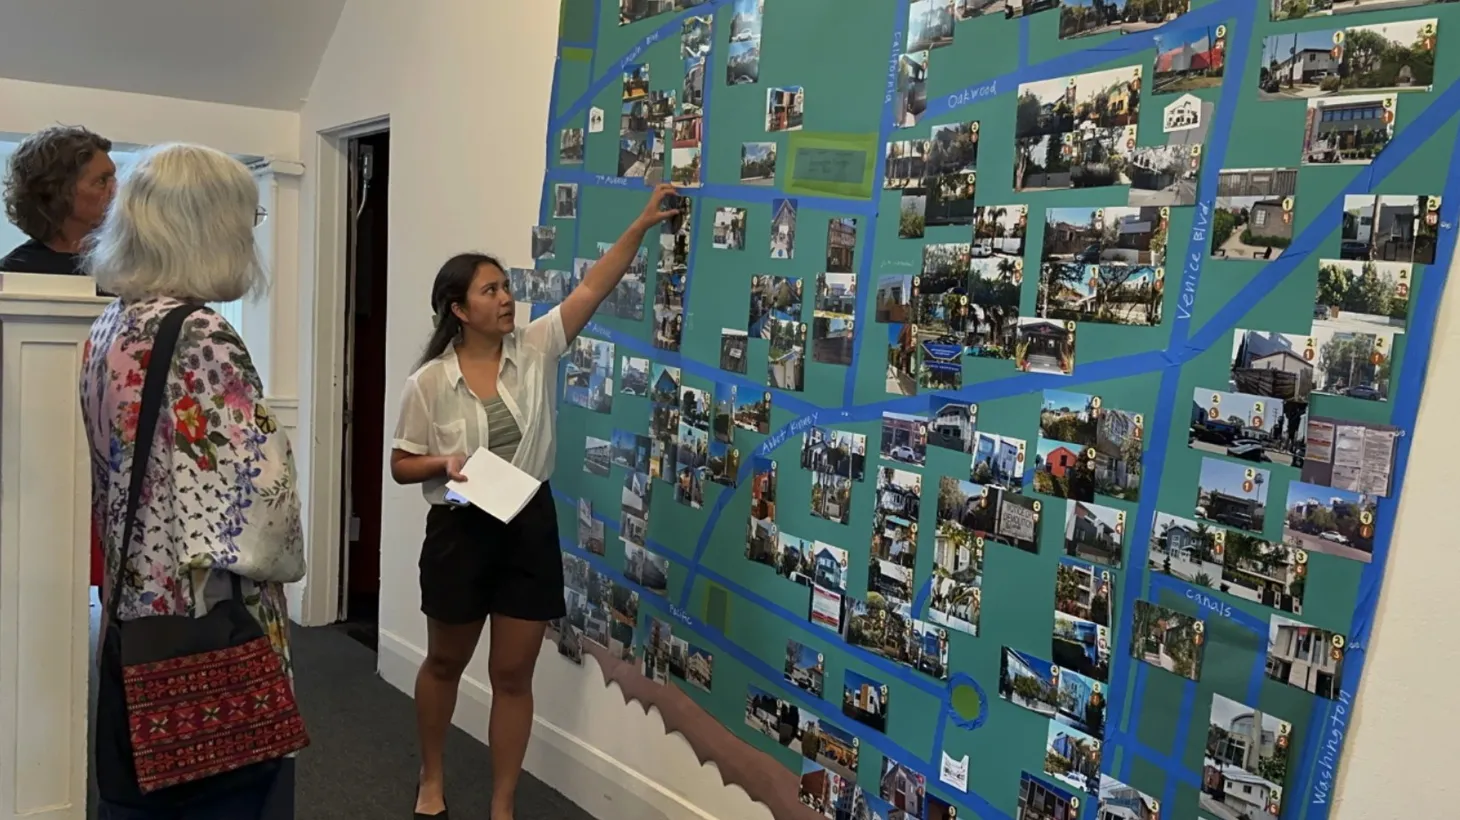 An art exhibit curator shows visitors a map of lost affordable units on each block in Vence.